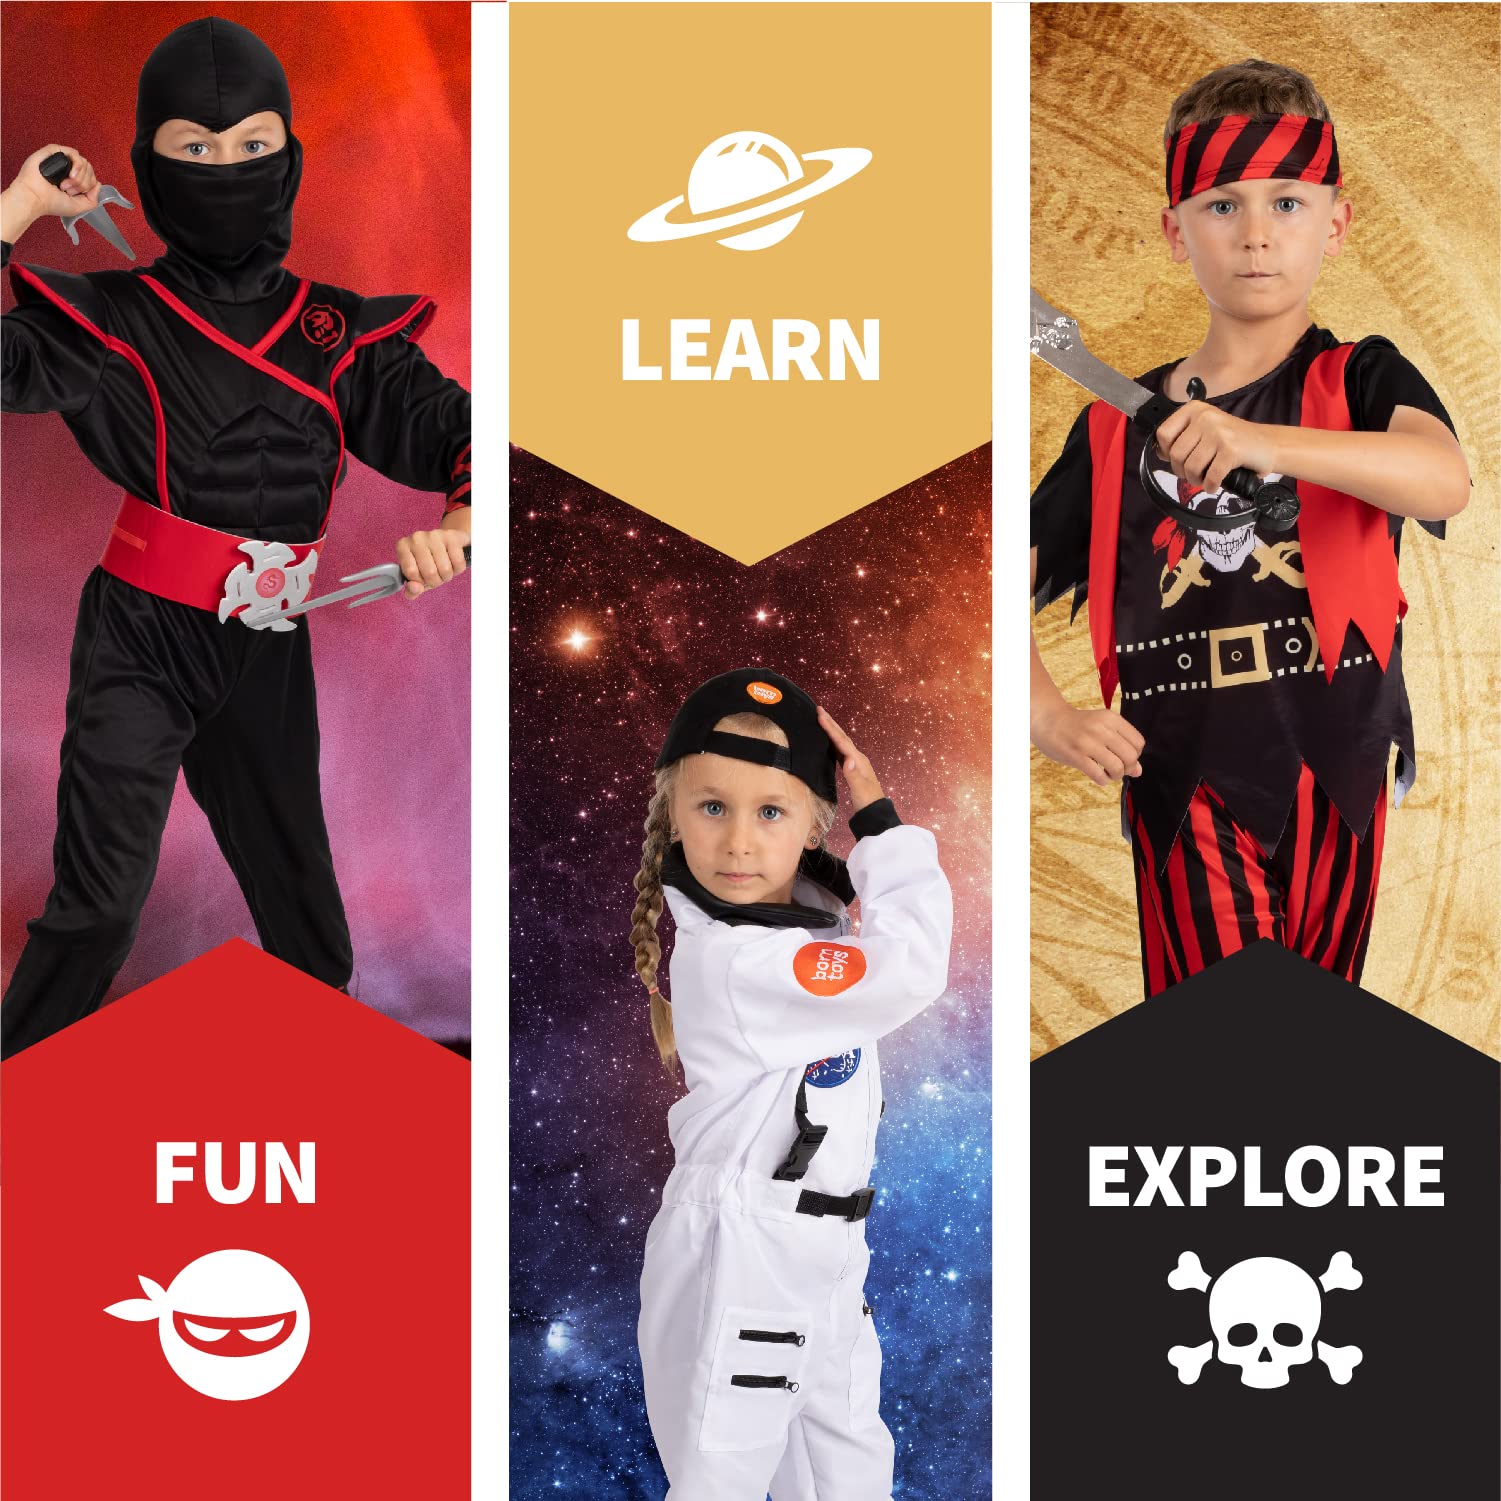 Born Toys 3-in-1 Kids' Dress Up & Pretend Play Set-Kids Pirate Costume, Kids Ninja Costume & Astronaut and Fireman Costume for Kids Ages 3-7